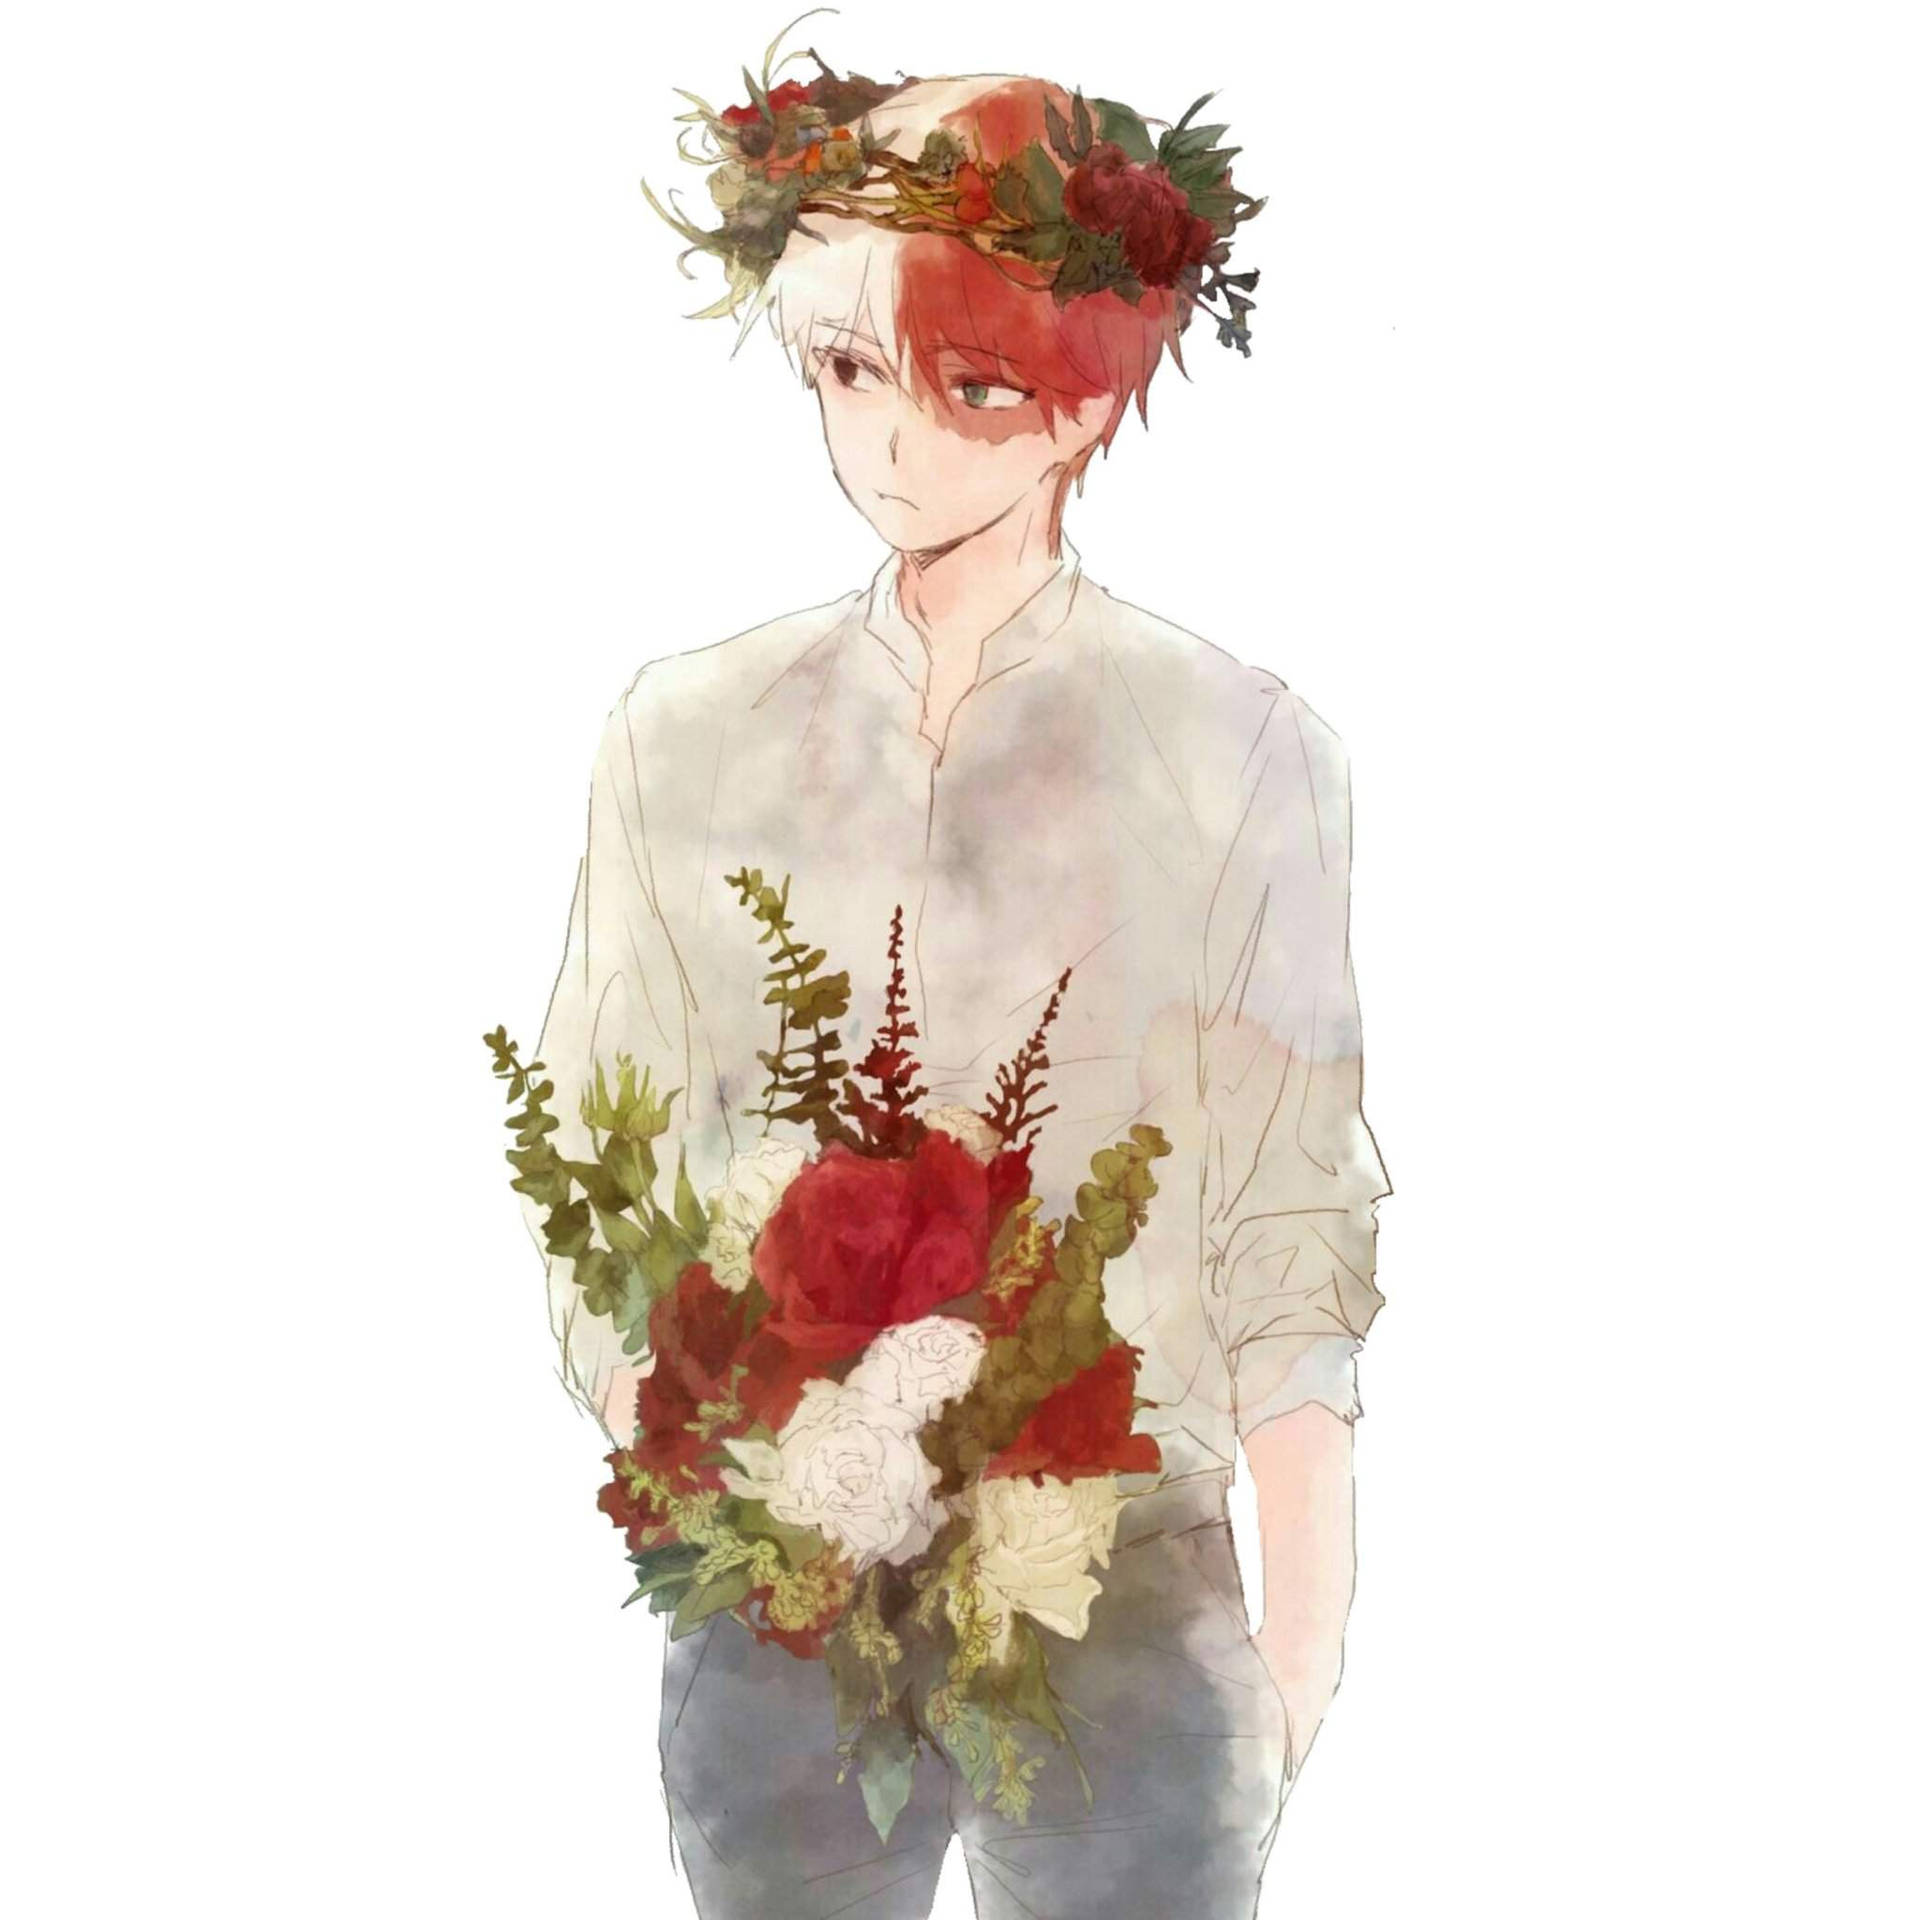 Cute Todoroki With Flowers Background